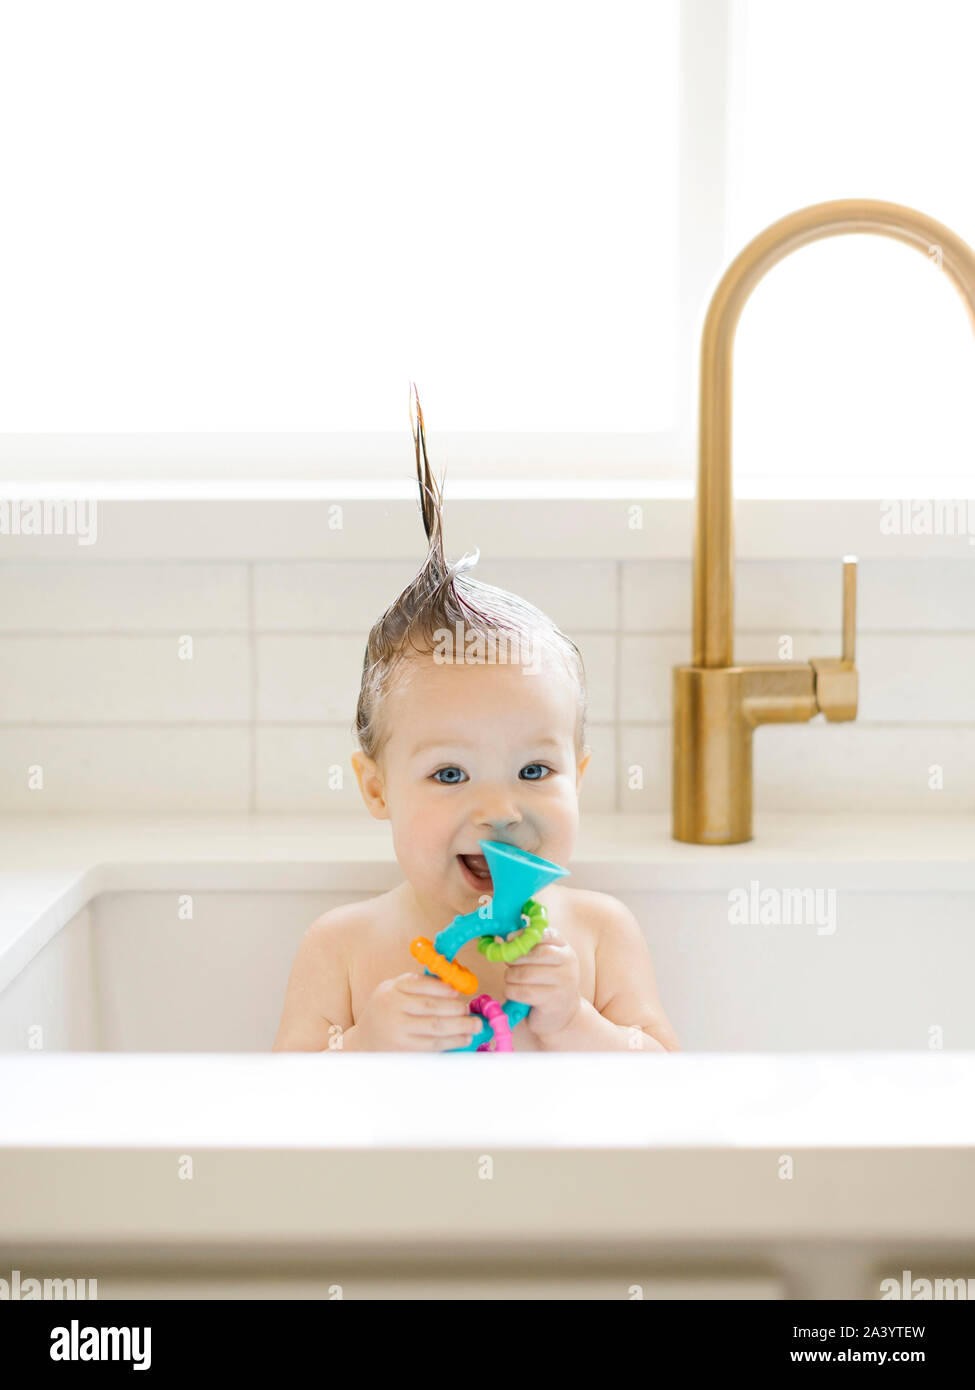 Baby girl with Mohican hairstyle holding toy while bathing in kitchen sink Stock Photo